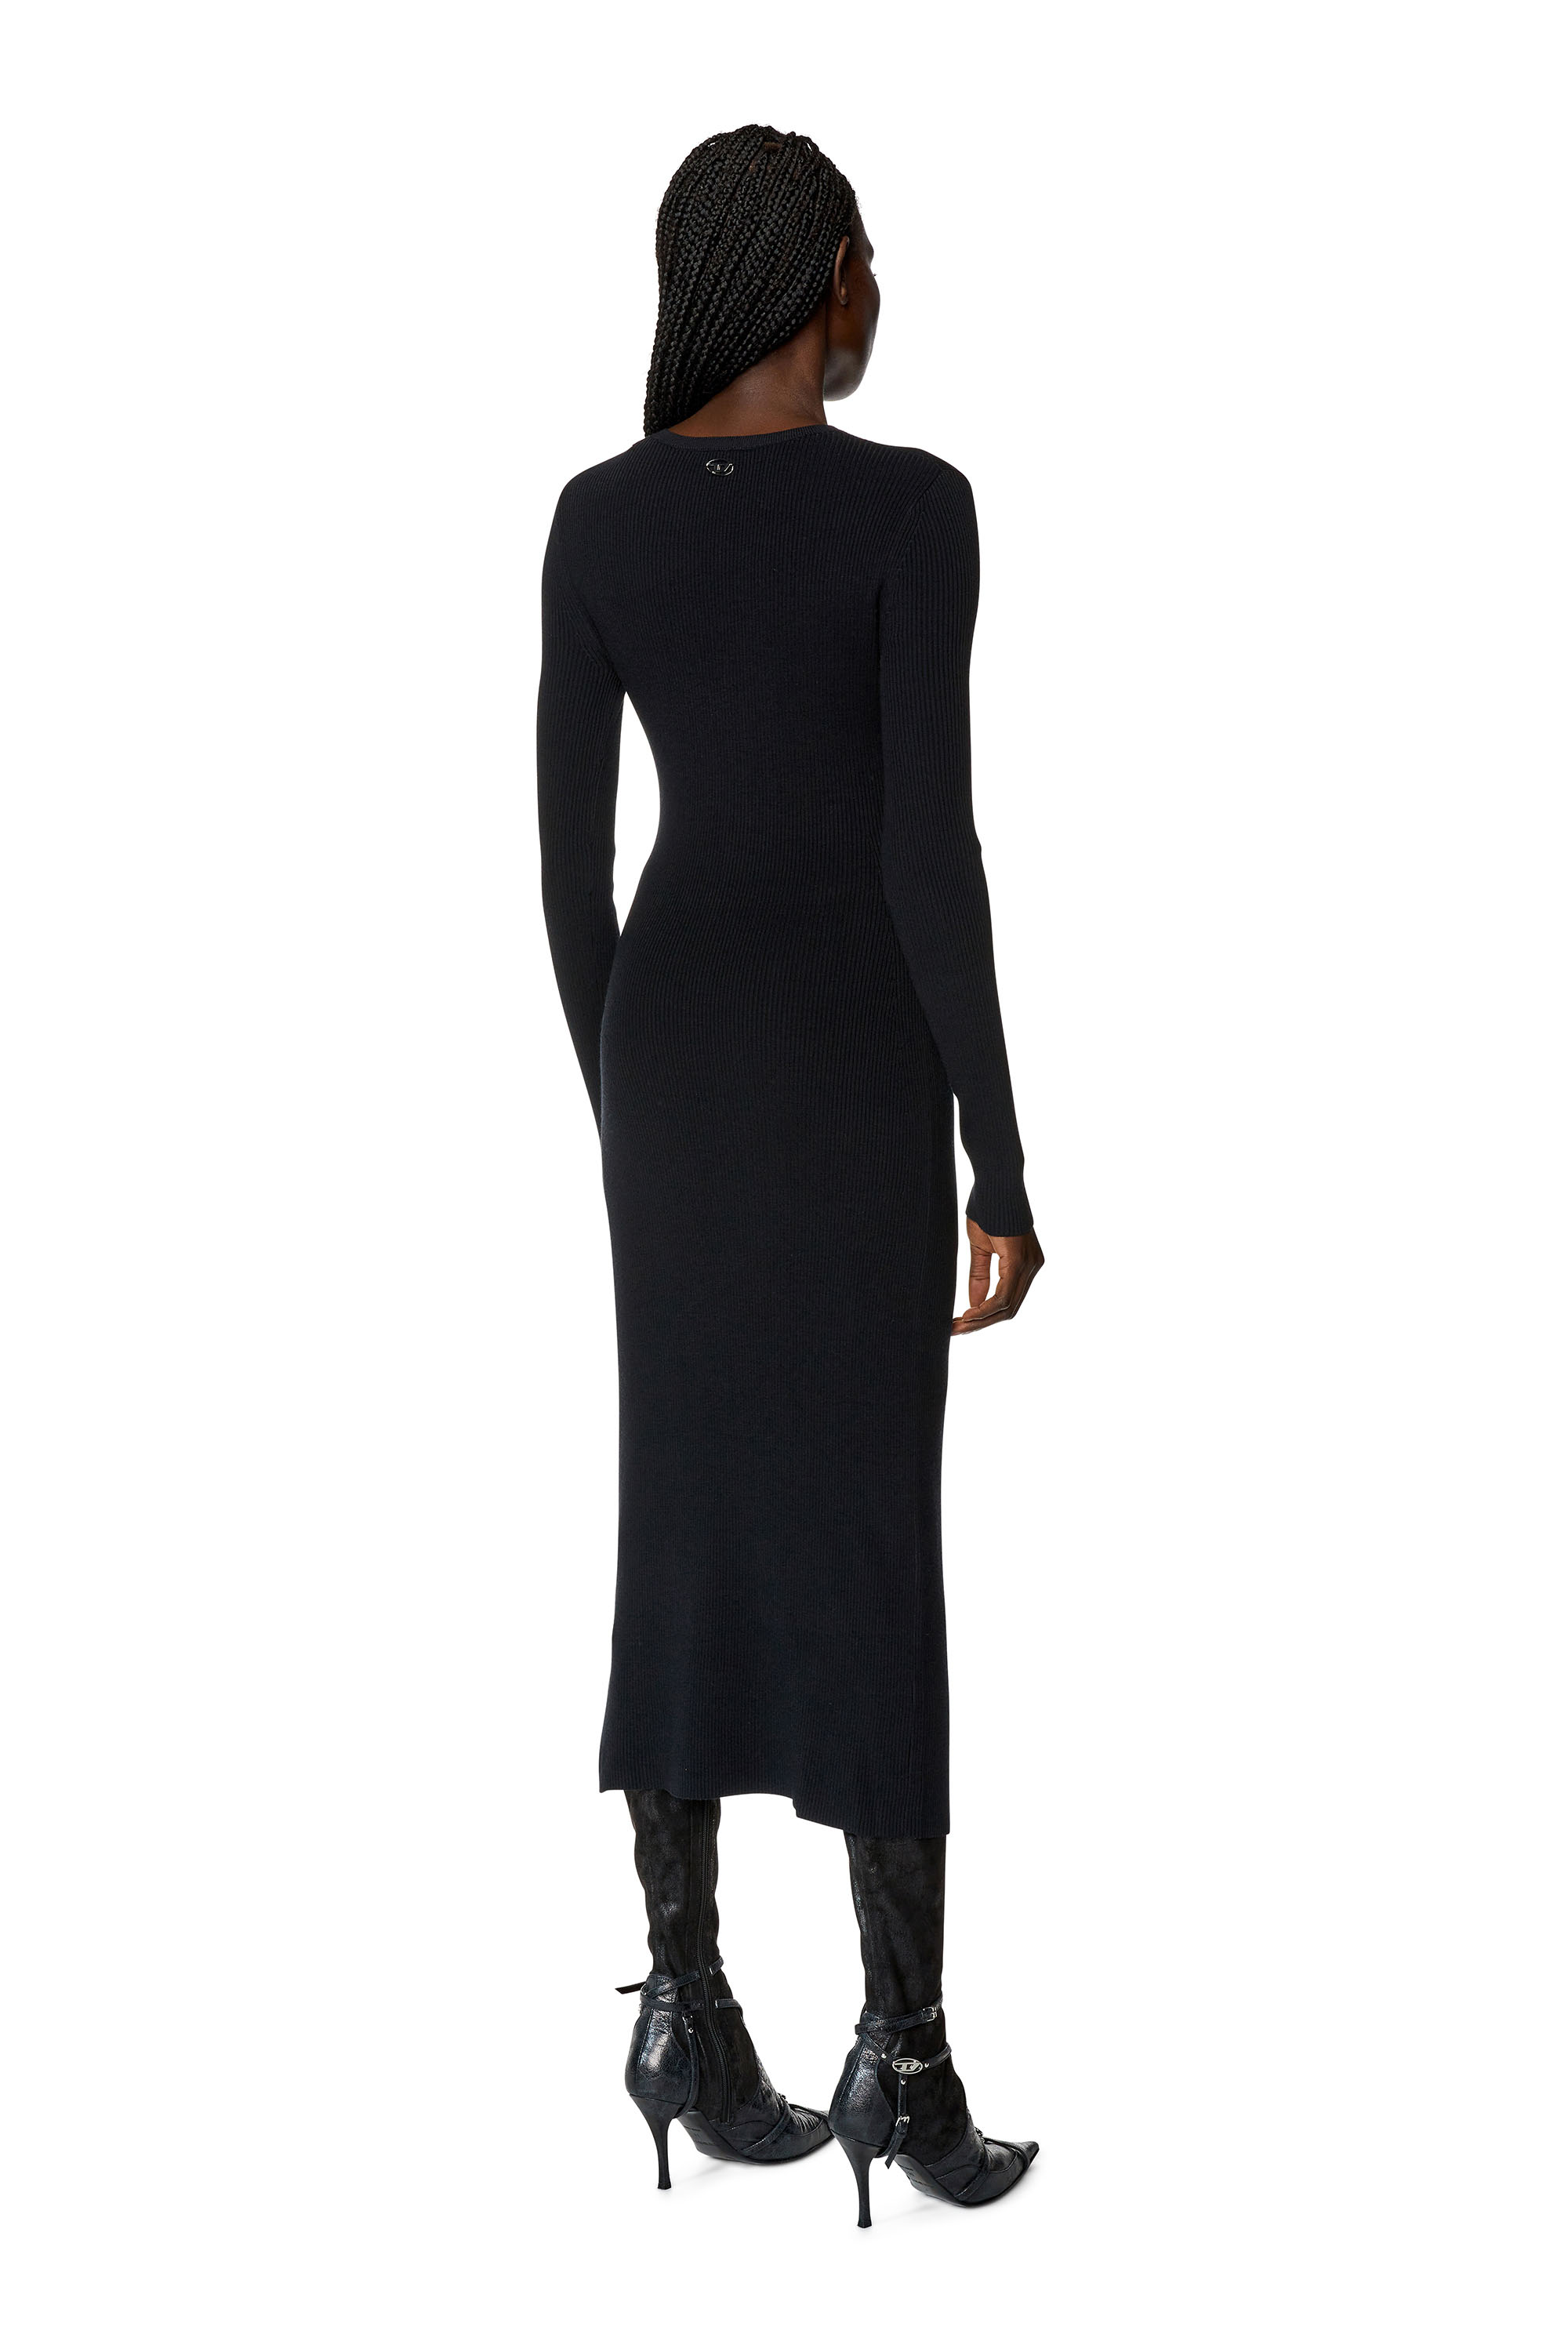 Diesel Wool-blend Dress With Cut-out In Nero